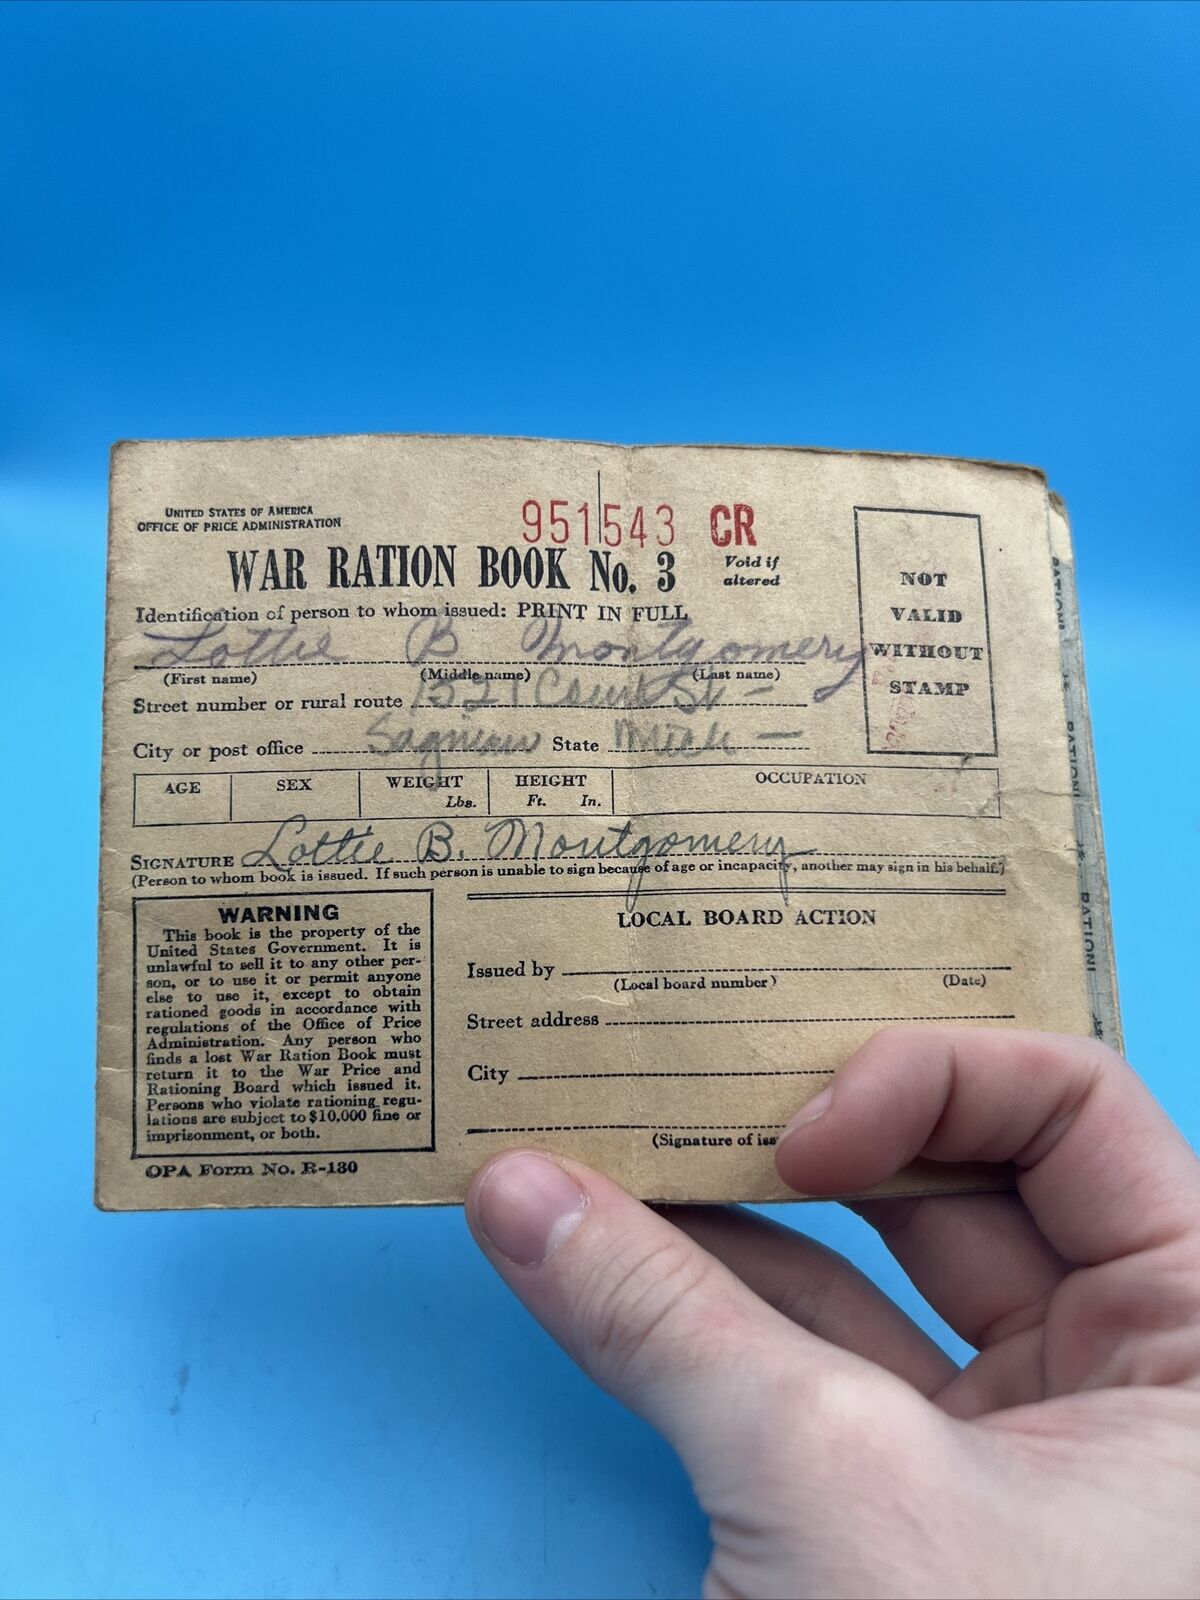 WAR RATION BOOK NO. 3 w/ STAMPS WWII AMERICA UNITED STATES ANTIQUE COLLECTIBLE